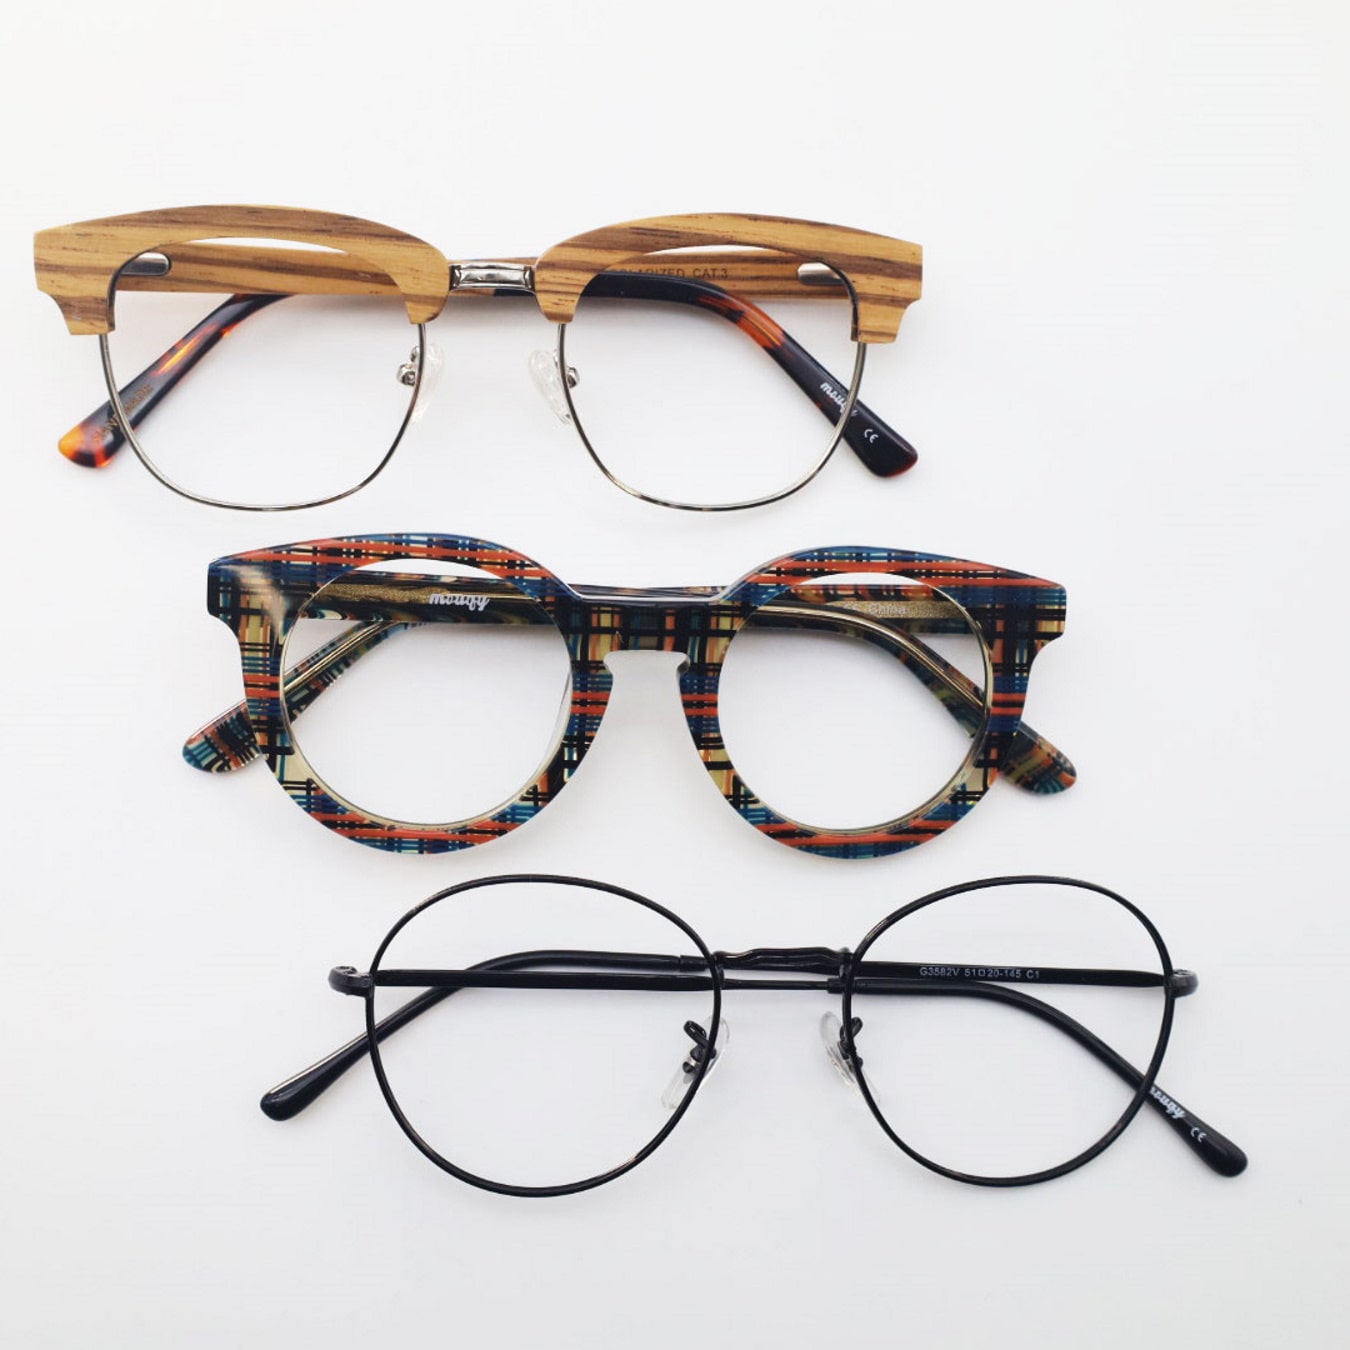 3 pairs glasses frames made of wood plastic and metal